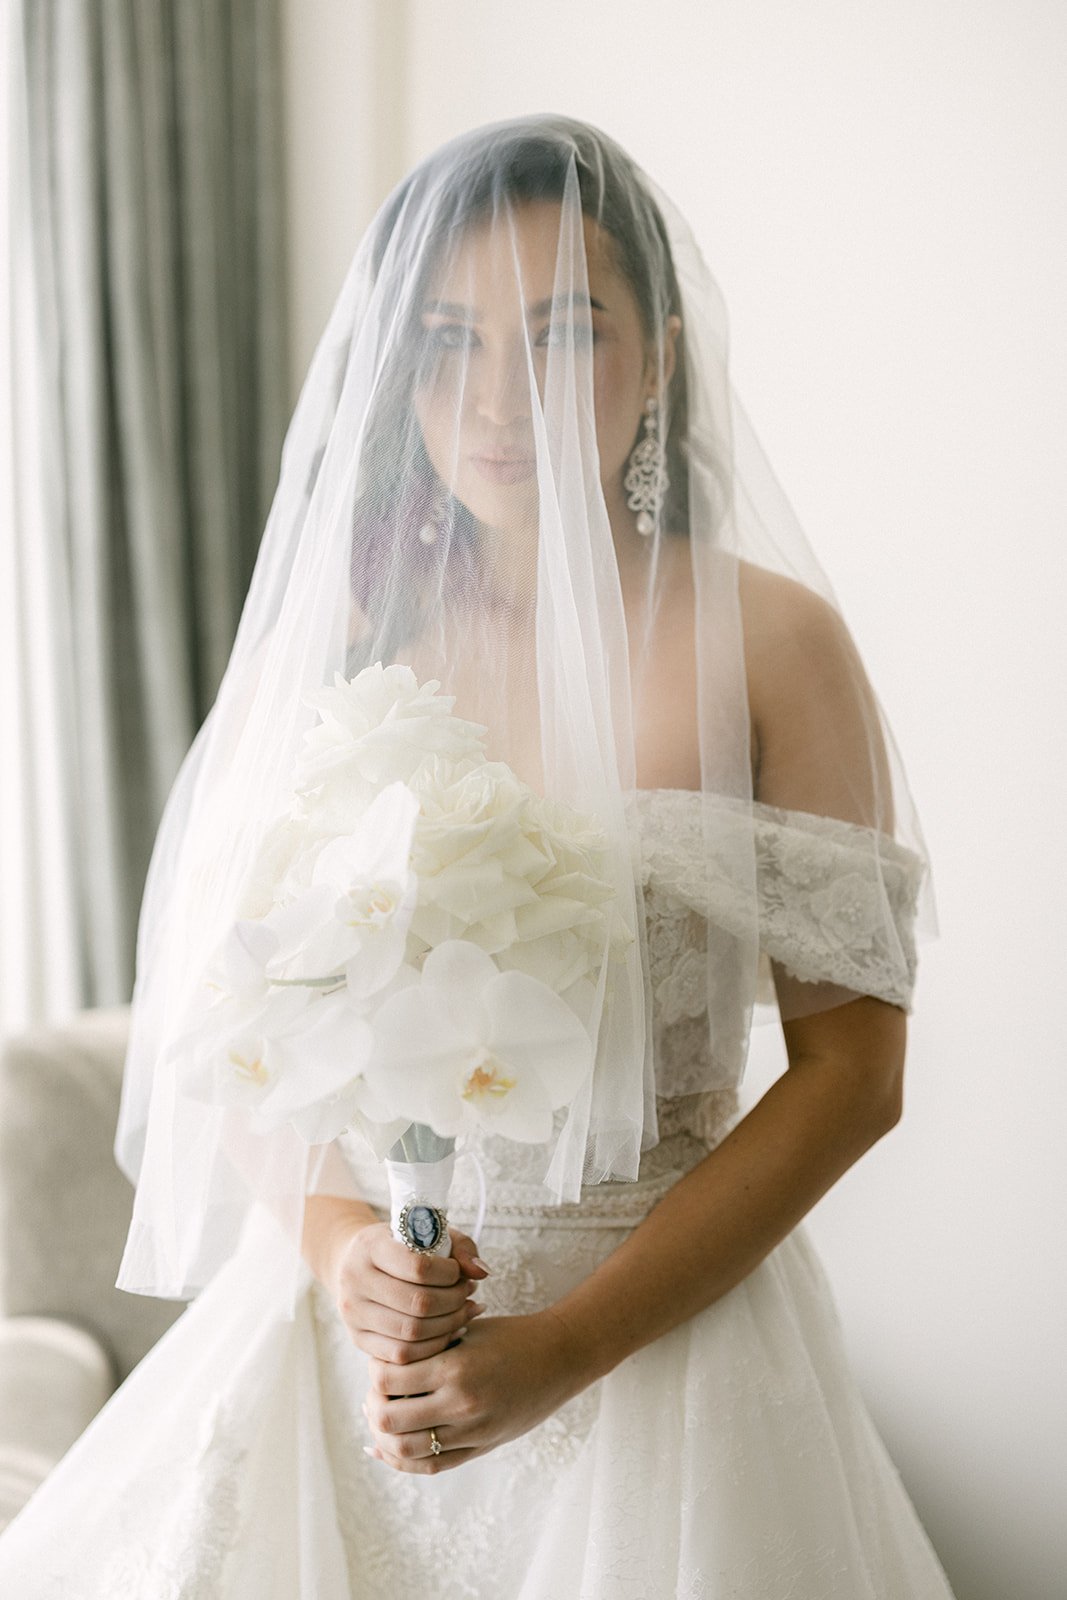 A bride with long dark hair is covered in a white wedding veil 